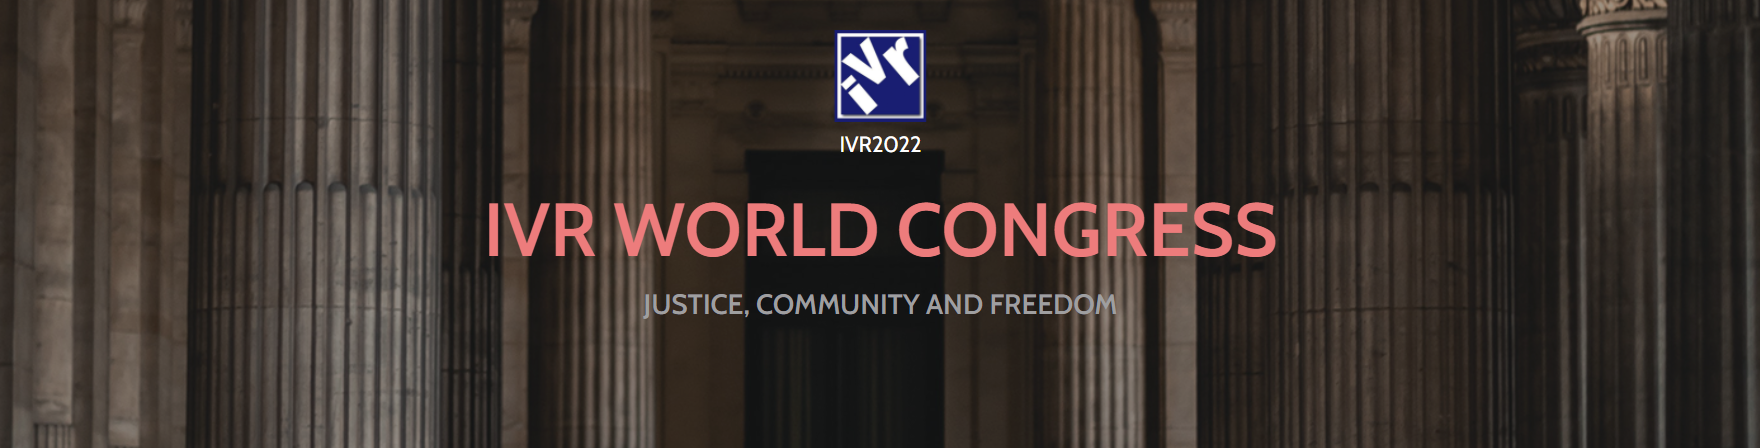 IVR 22 - Construction of emerging rights. Debates for the basis of new constitutional standards